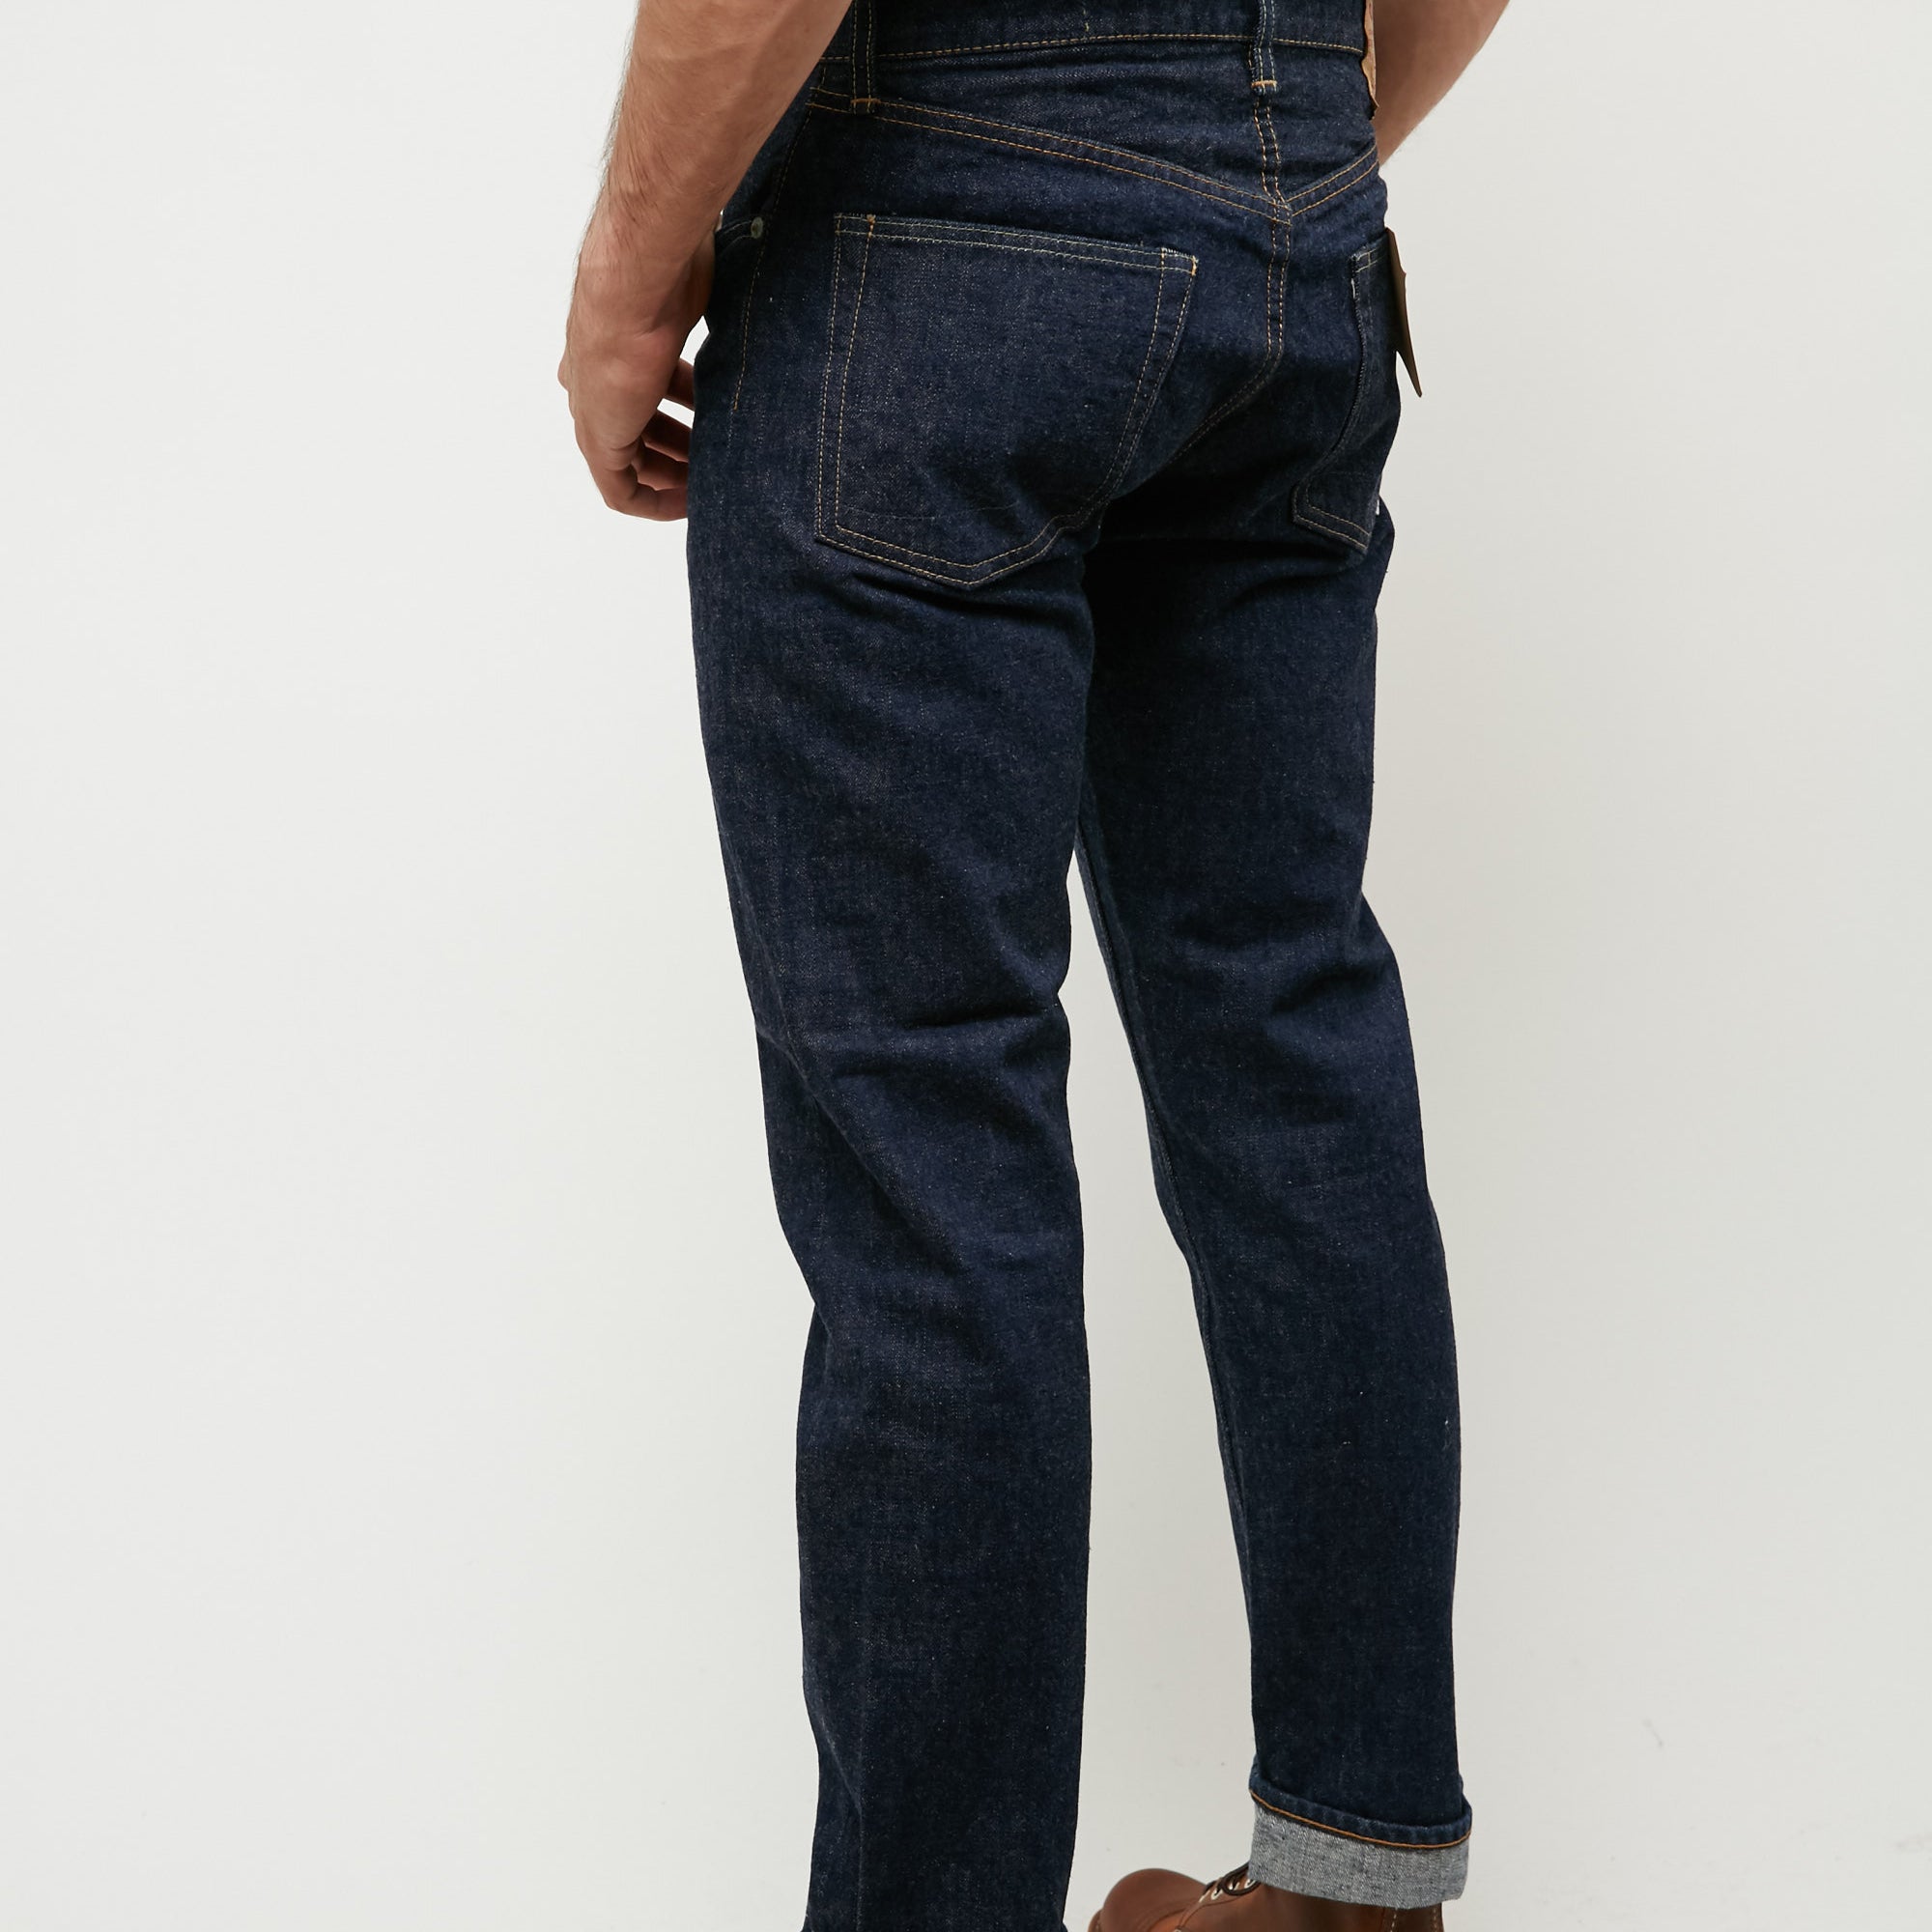 orSlow 107 Ivy Fit Slim Jean - One Wash - Totem Brand Co.